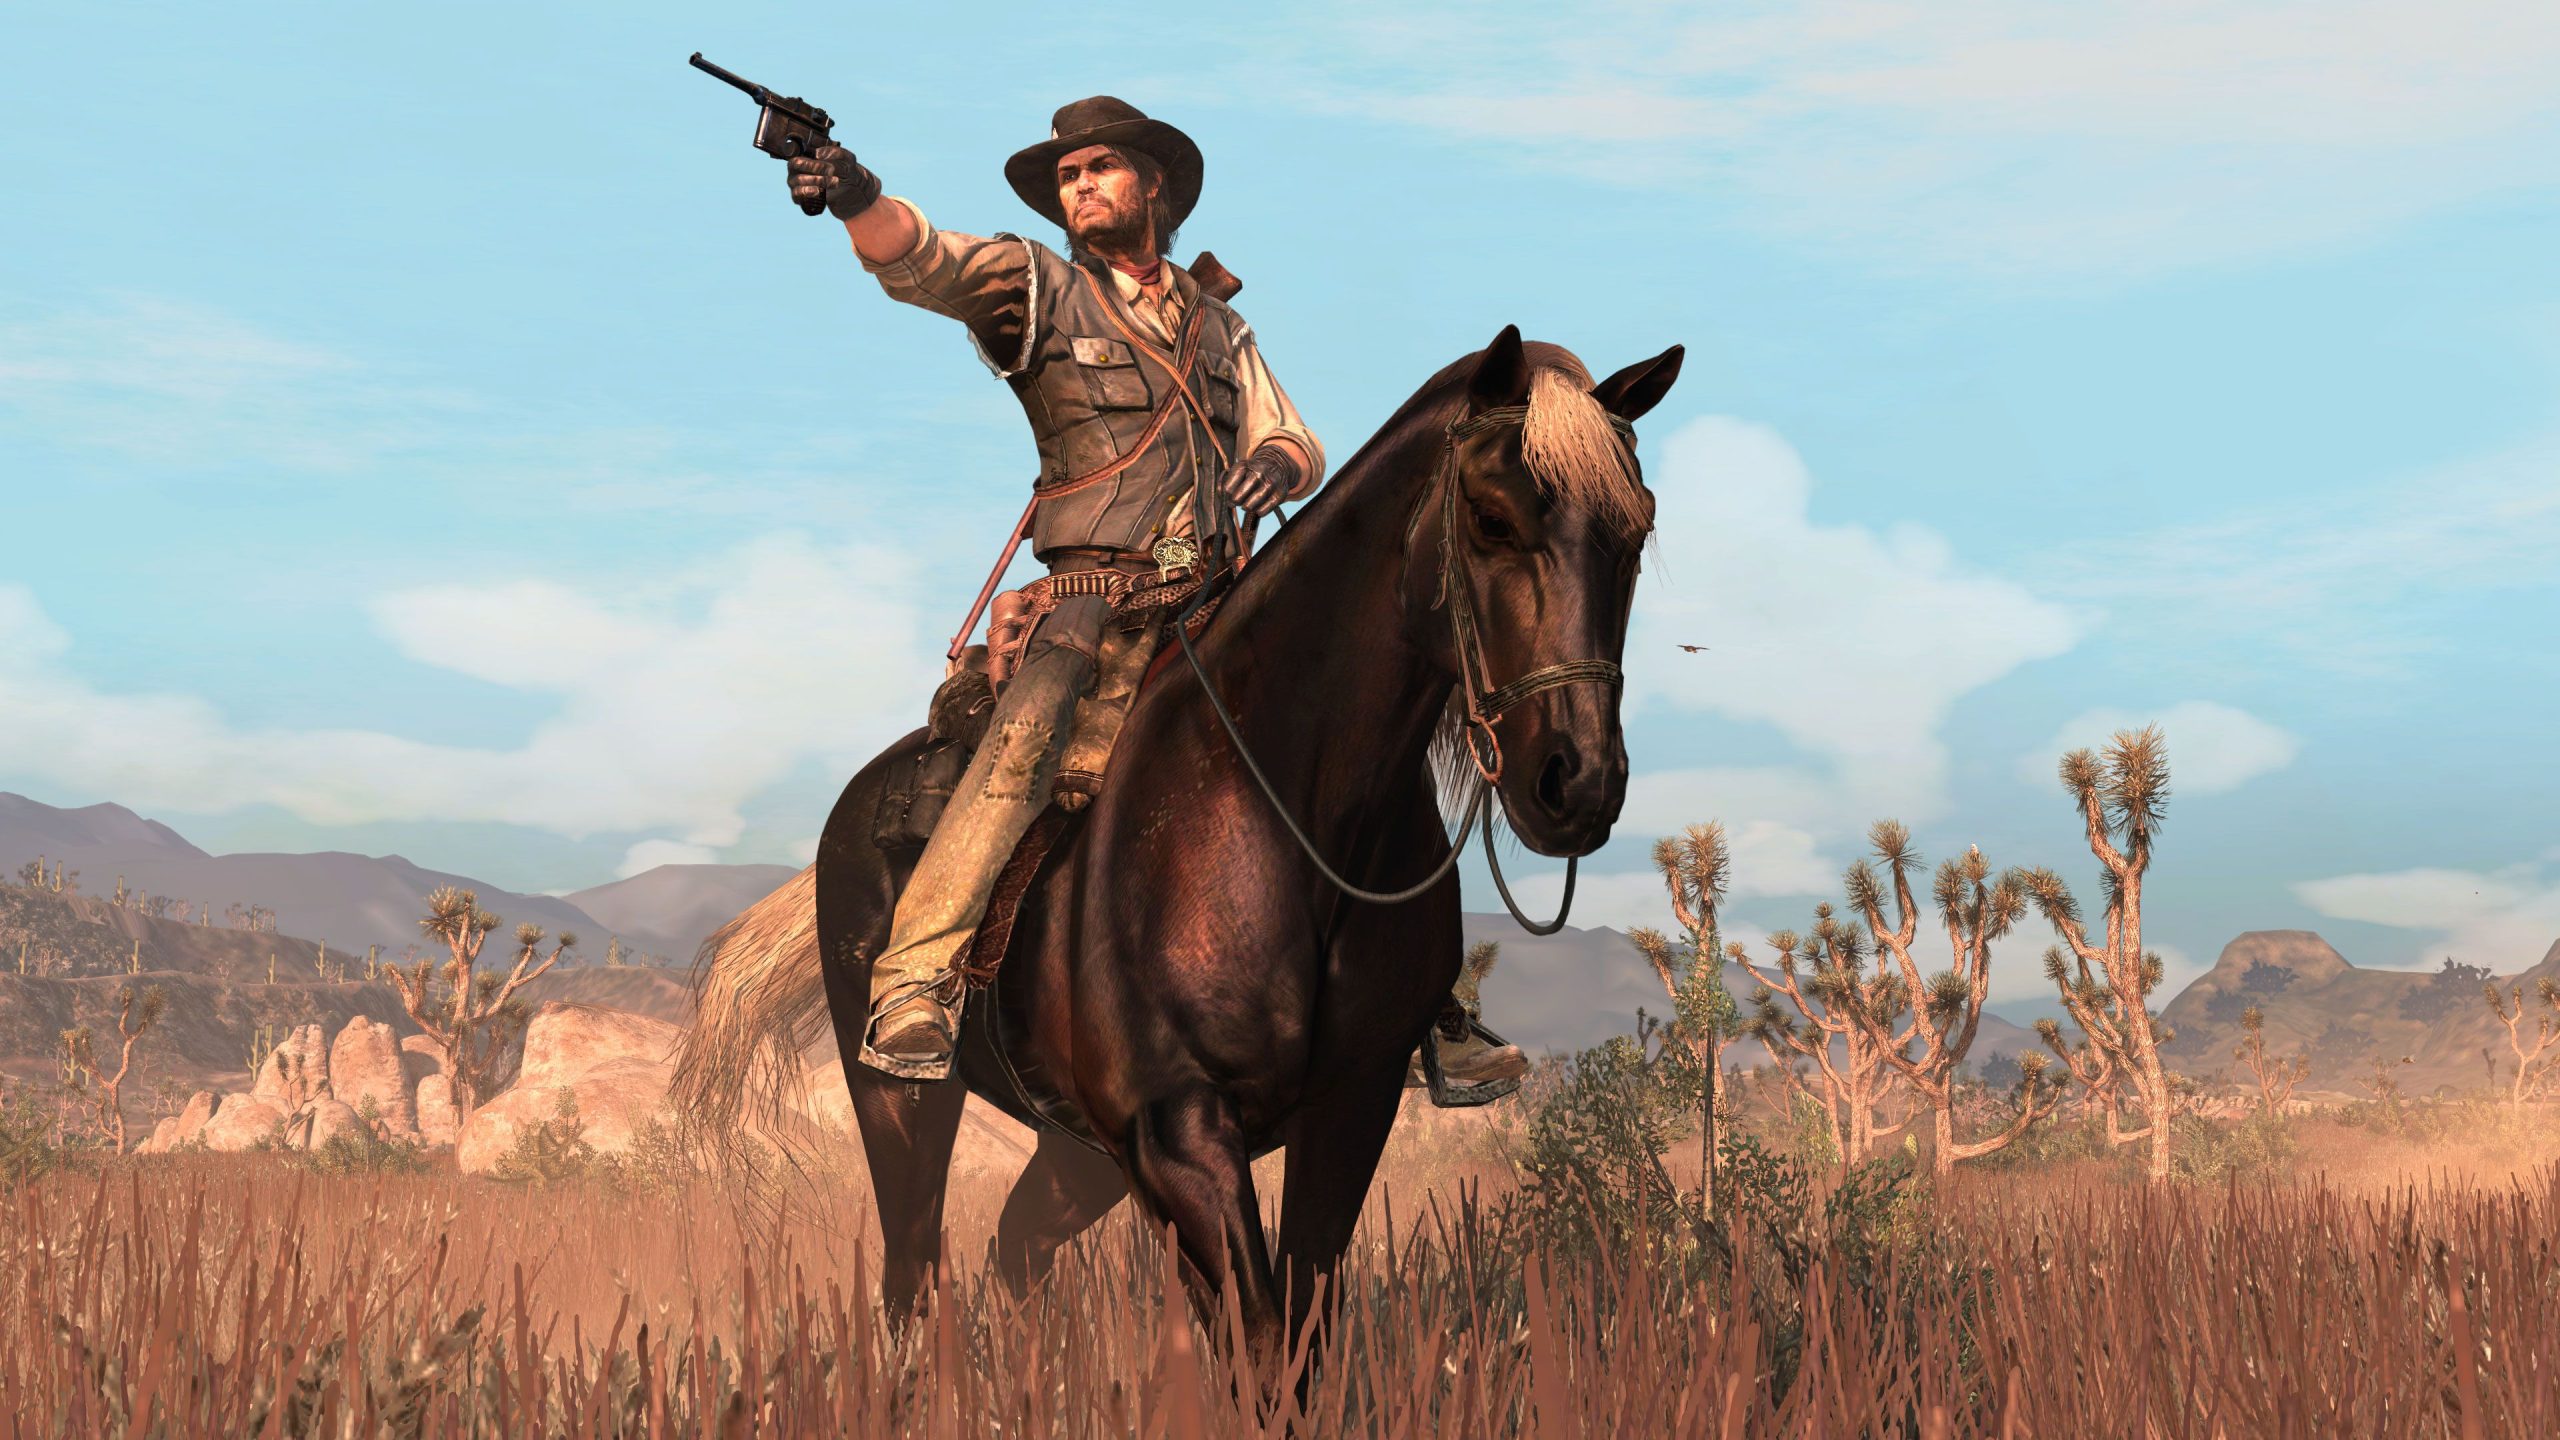 Red Dead Redemption 1 Runs at 4K/30 FPS on PS5